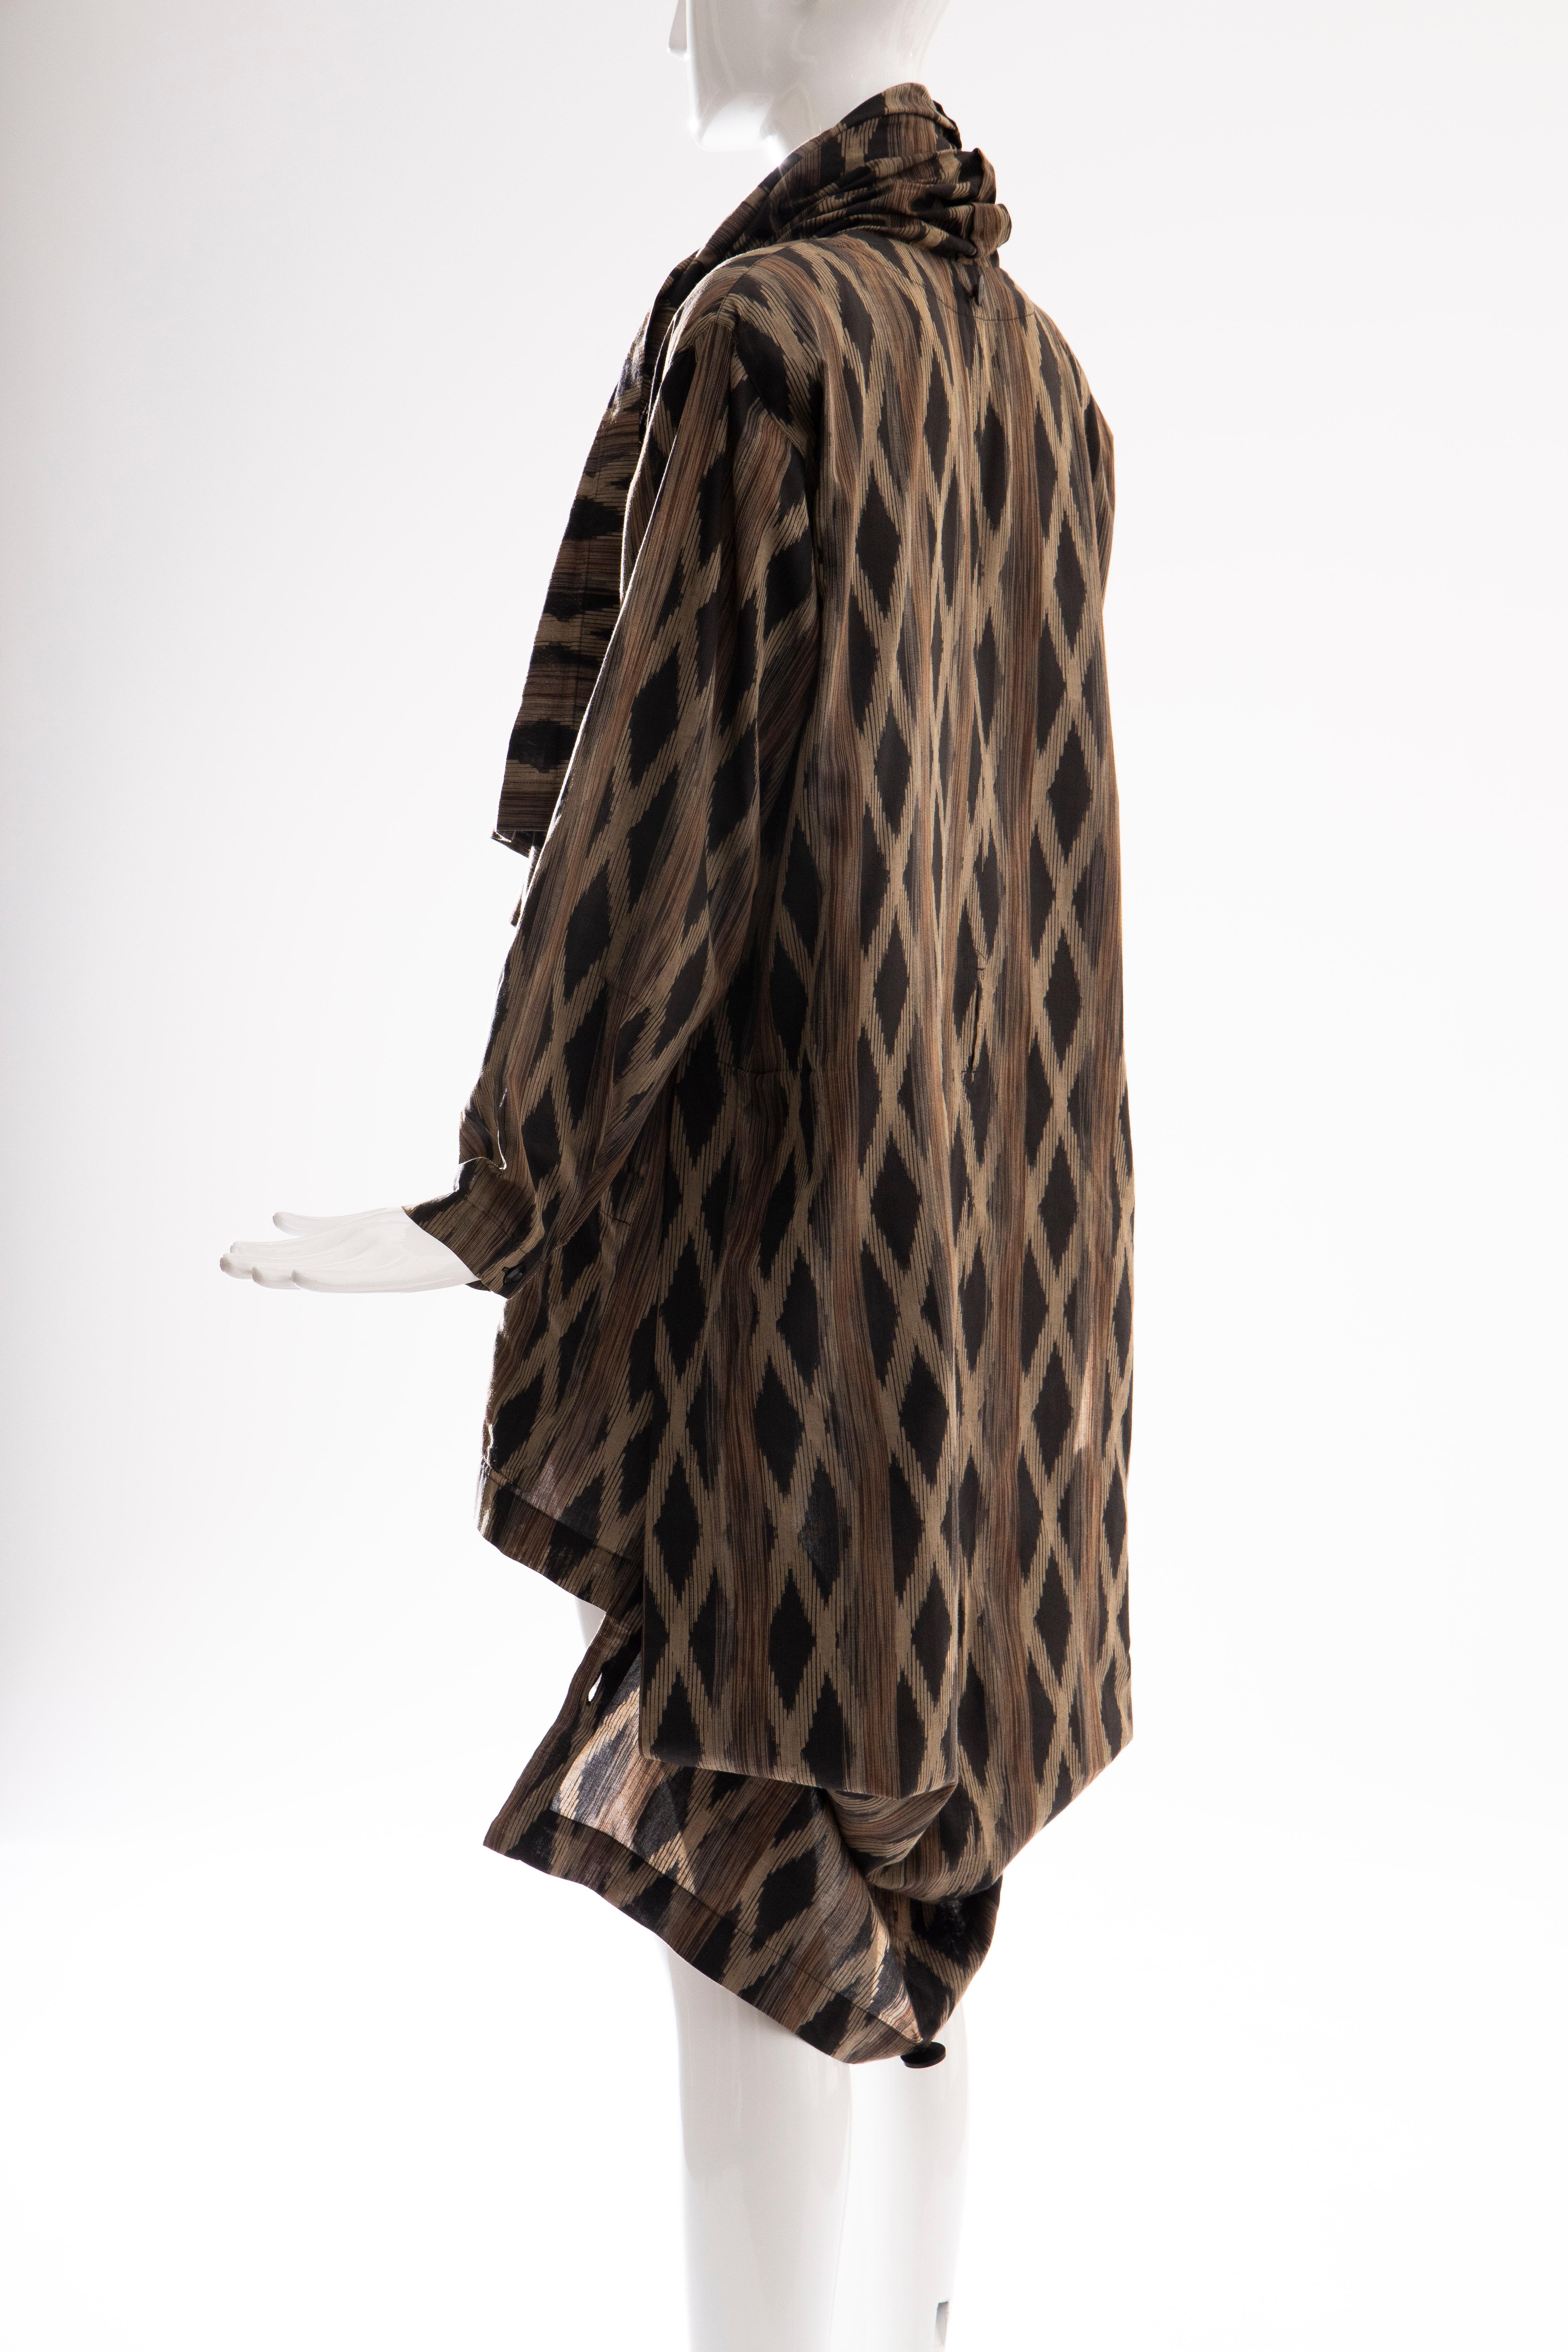 Issey Miyake Cotton Silk Lattice Weave Jacket Duster Cardigan, Fall 1986 For Sale 10